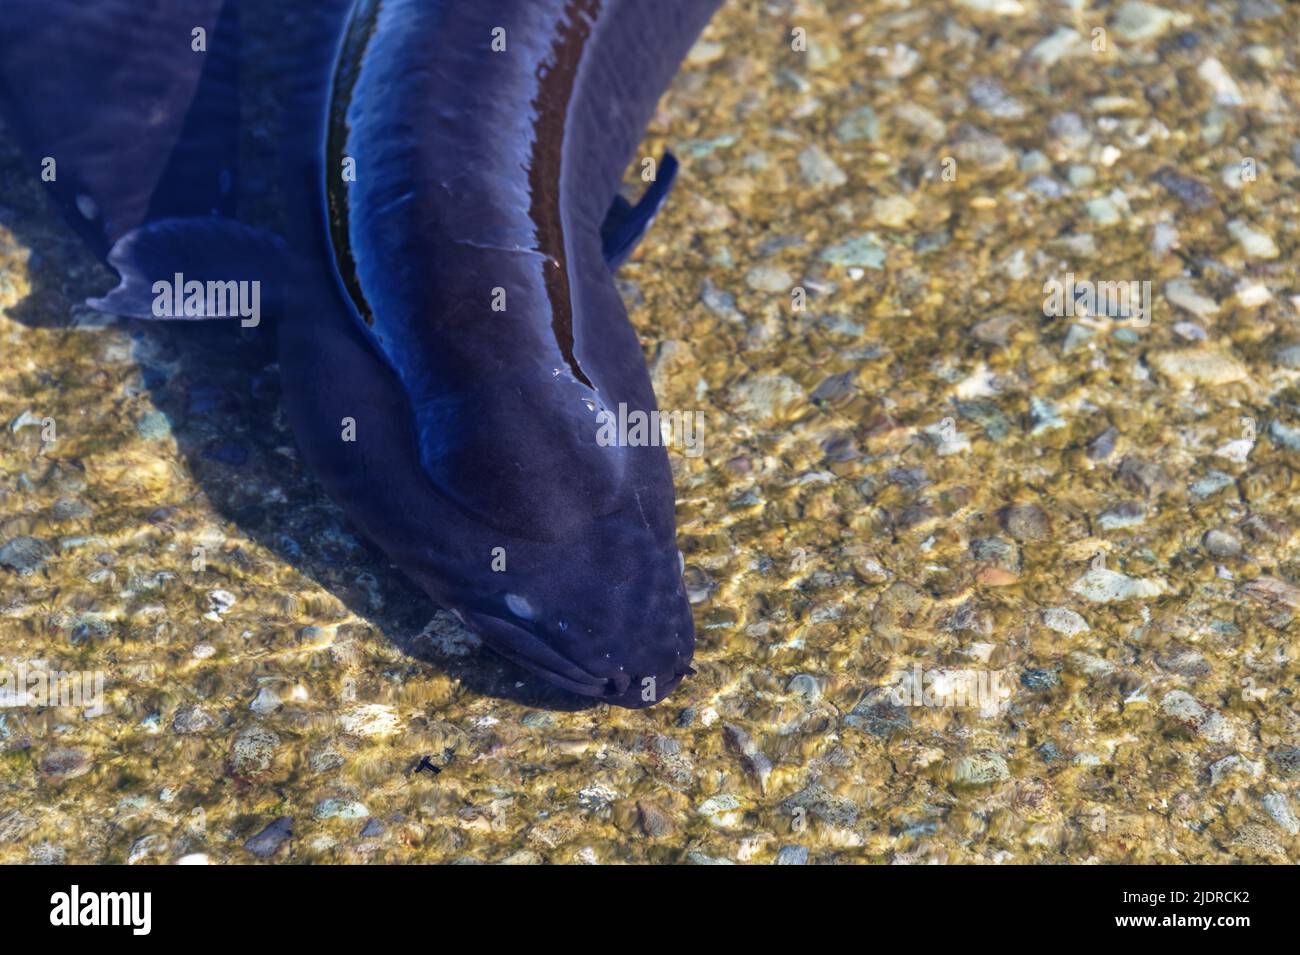 New Zealand's native longfin eel in the shallows, its back is breaking the surface of the water. Stock Photo